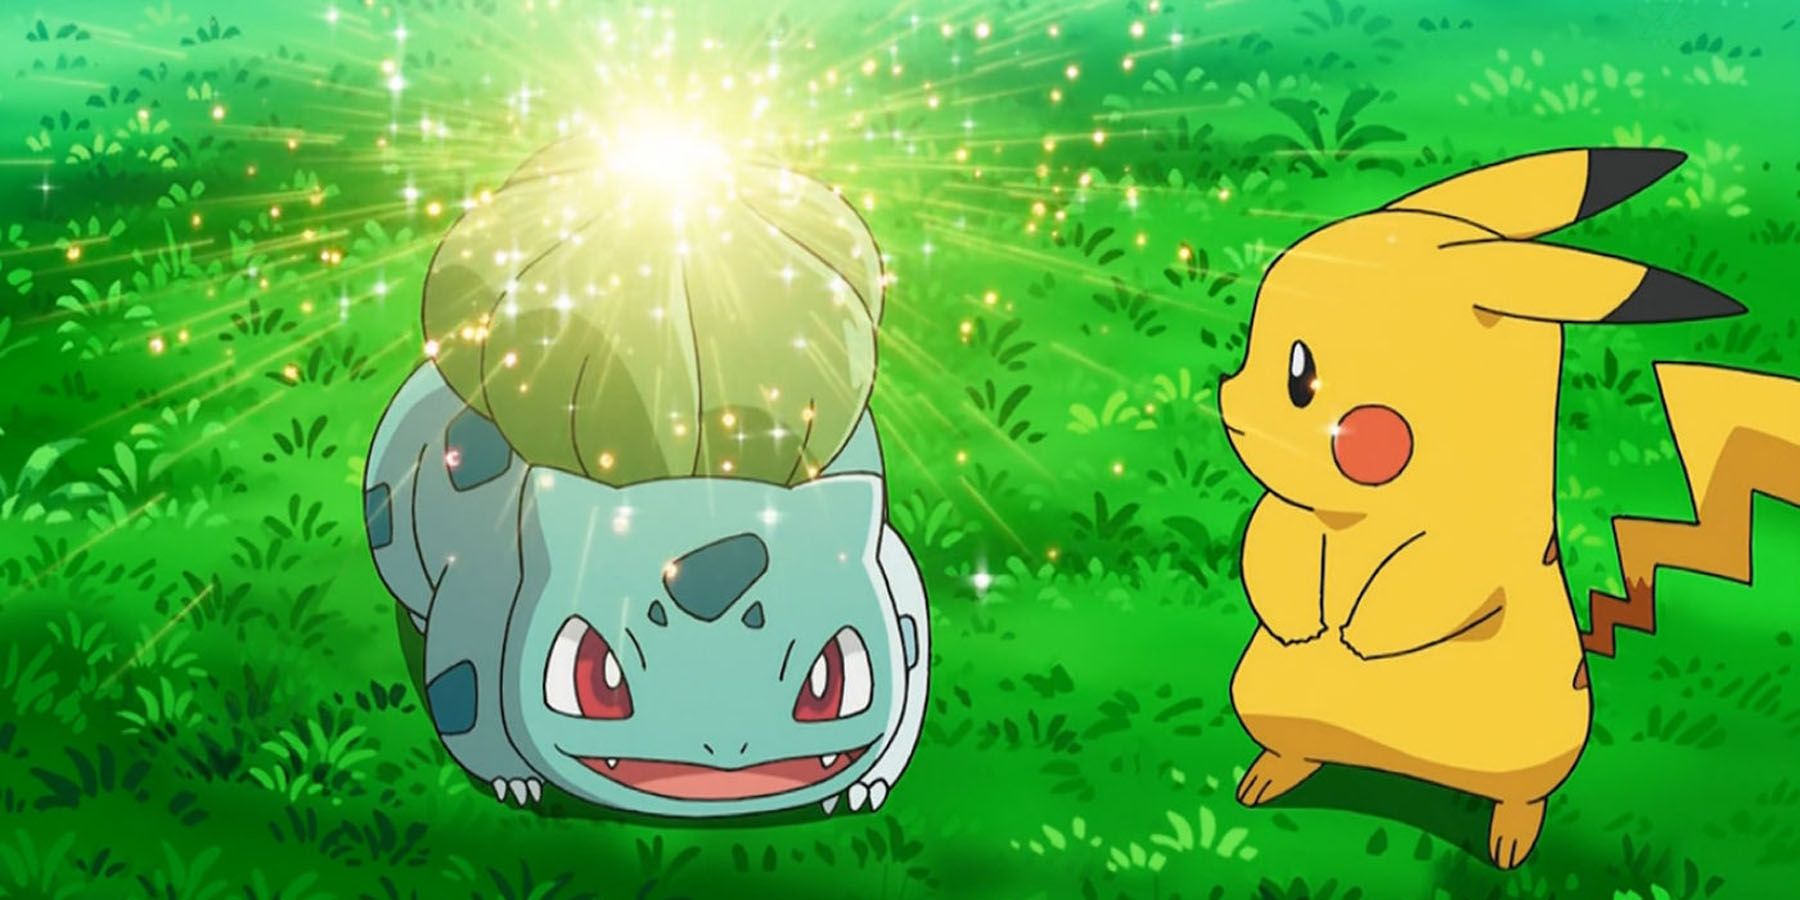 A screenshot of Bulbasaur charging its Solar Beam while Pikachu watches in the Pokemon anime.